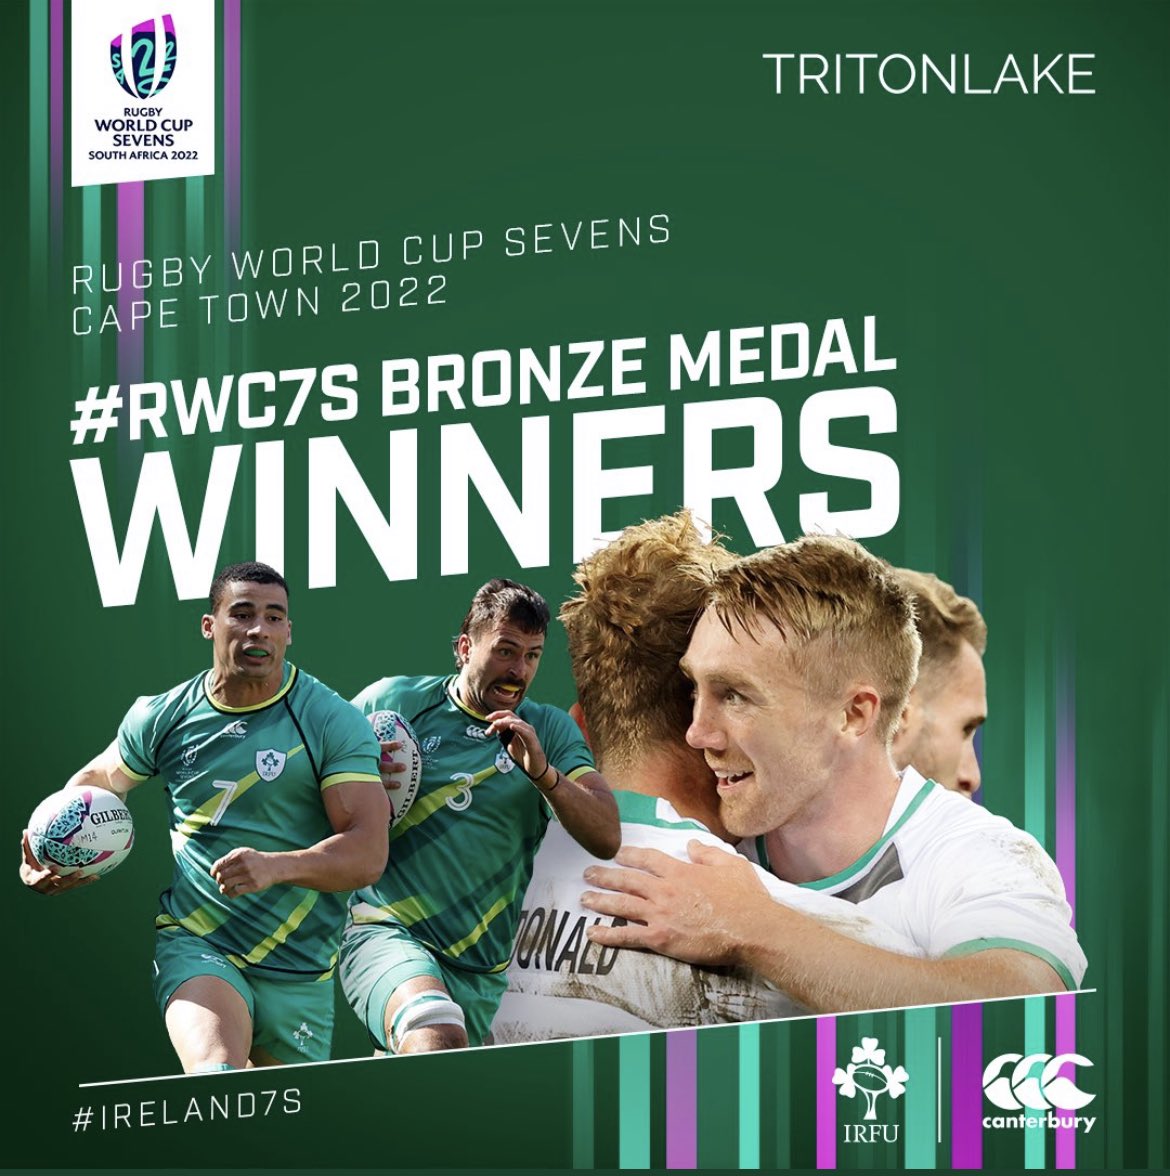 Great result 🥉 𝐁𝐑𝐎𝐍𝐙𝐄 𝐌𝐄𝐃𝐀𝐋 𝐖𝐈𝐍𝐍𝐄𝐑𝐒! 🥉 Huge congratulations to @mcnuts_ It was an epic week for the ex @rockwellcollege player who is an absolute legend of the #Ireland7s journey. 👏👏 @TritonLake | #RWC7s